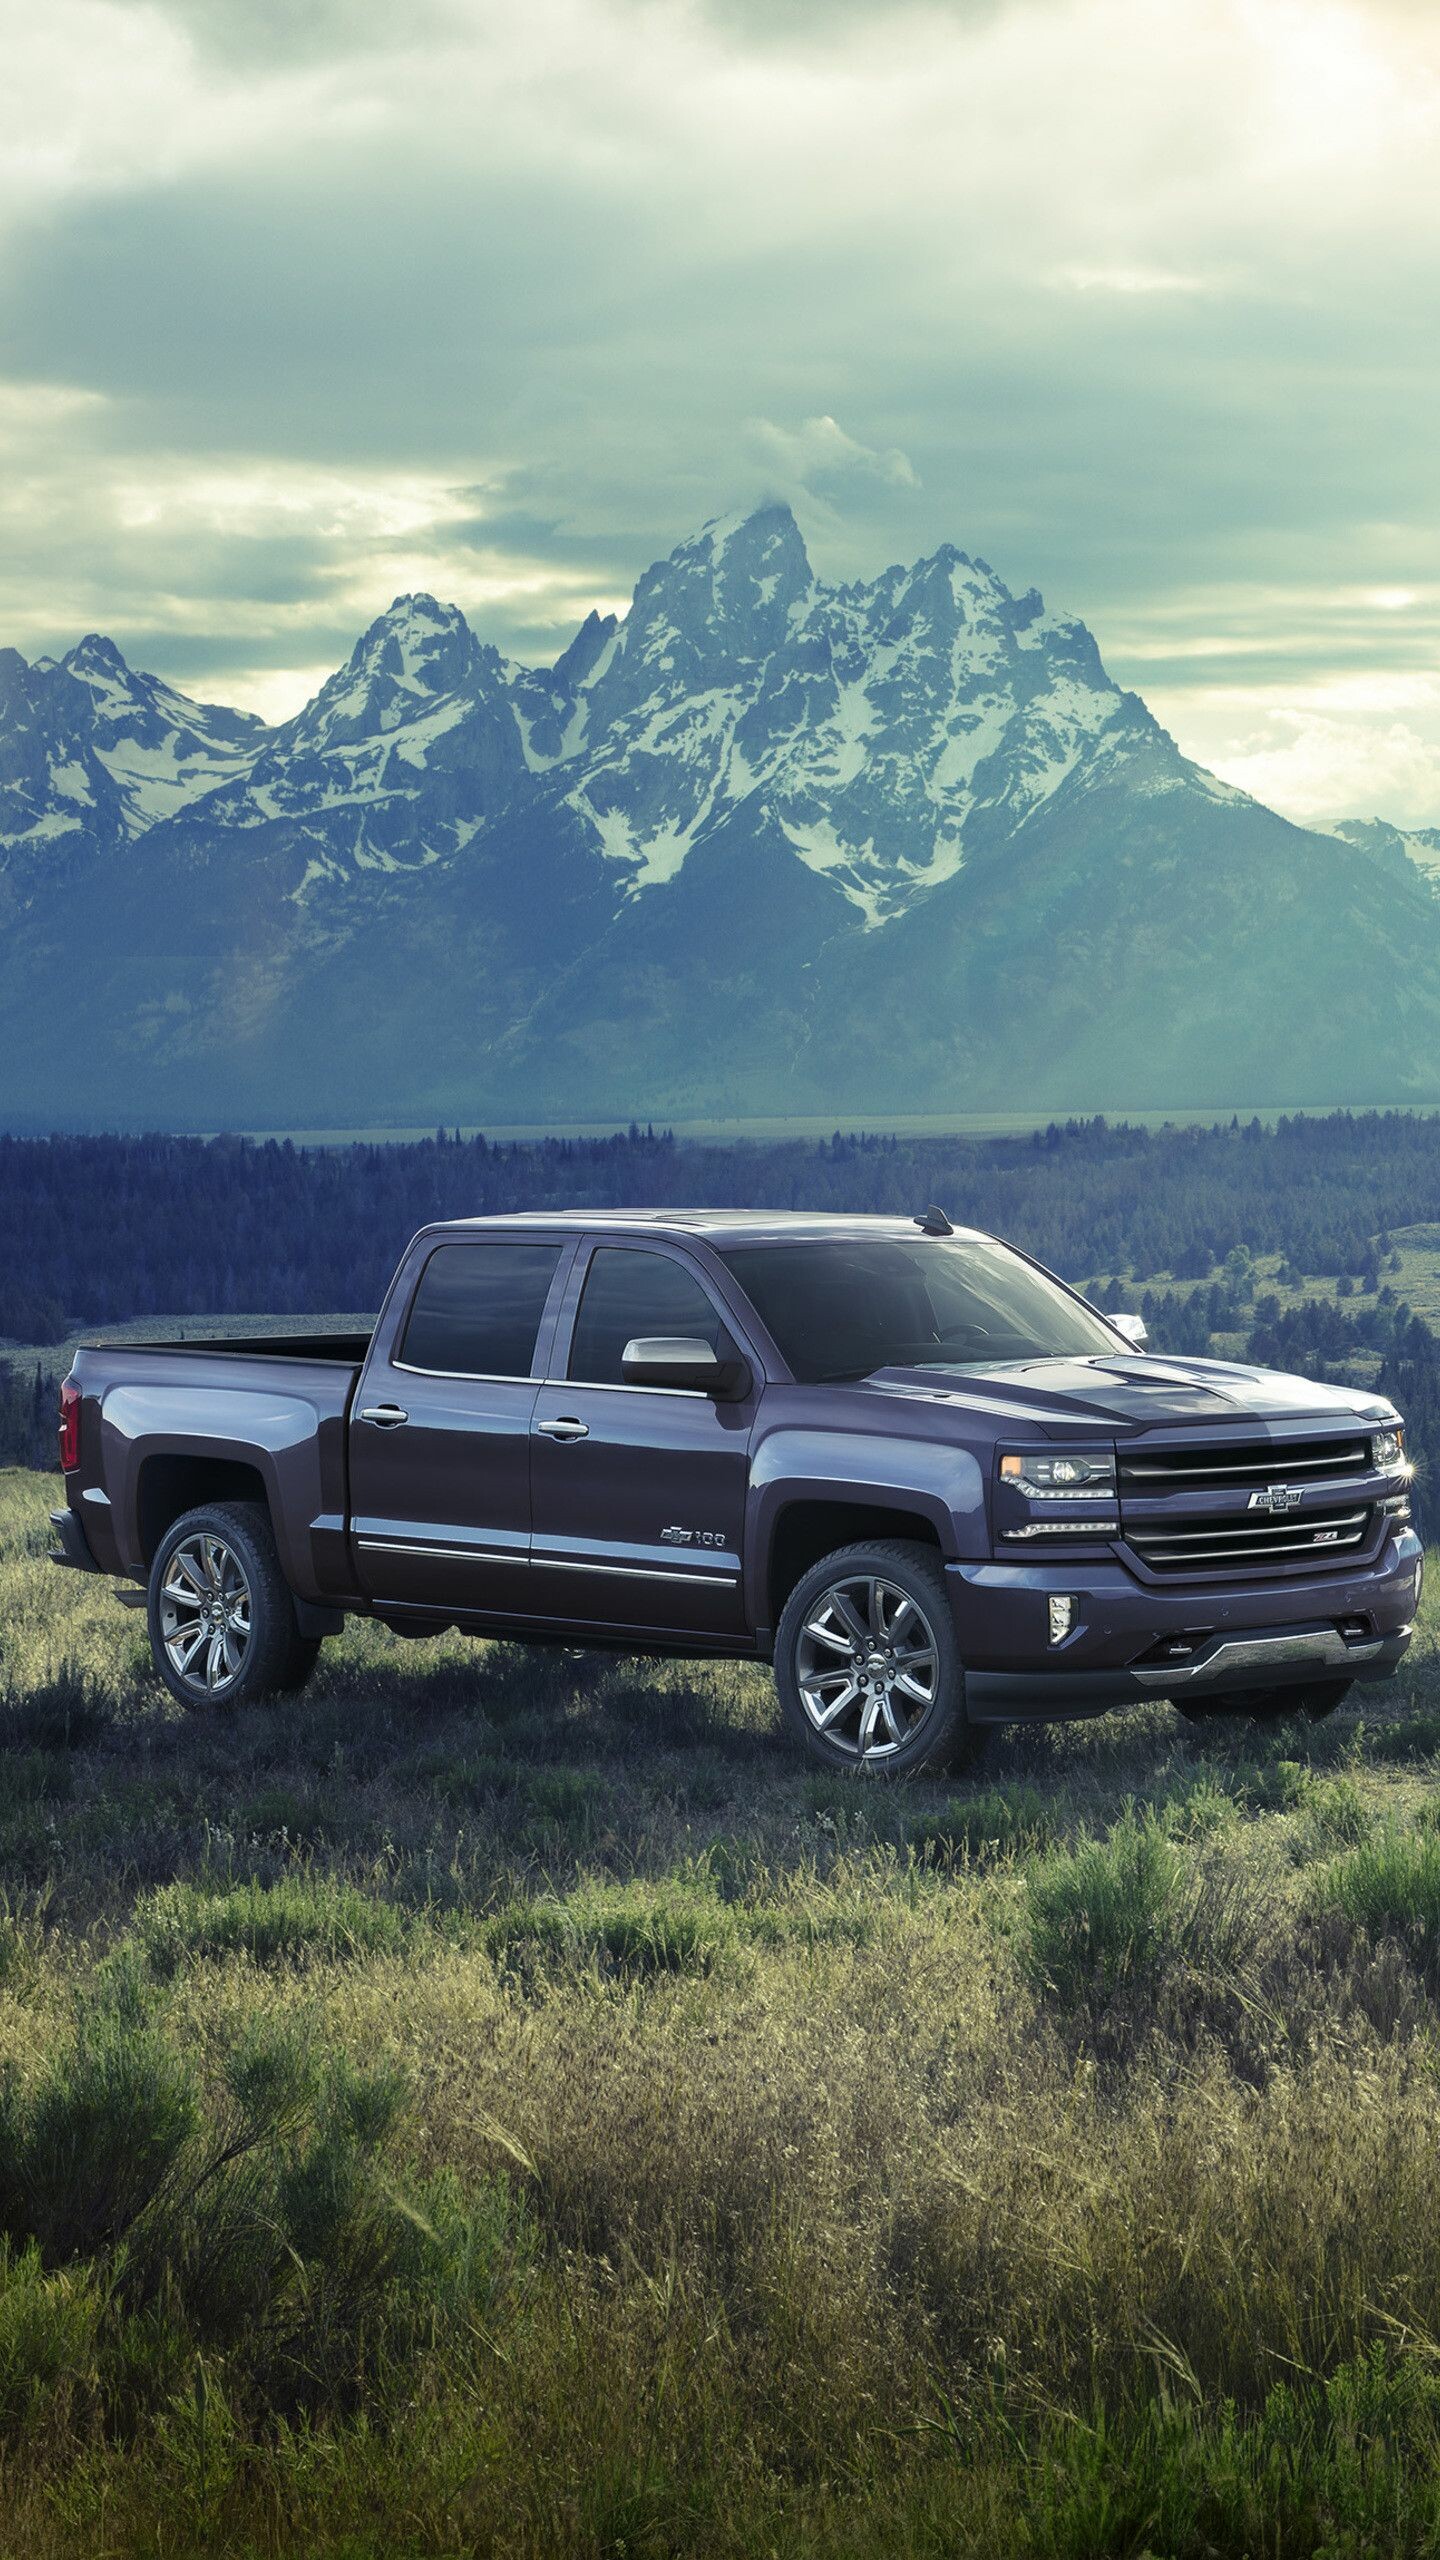 GMC Sierra: A range of trucks manufactured by General Motors, Shares mechanical commonality with the Chevrolet Silverado. 1440x2560 HD Wallpaper.